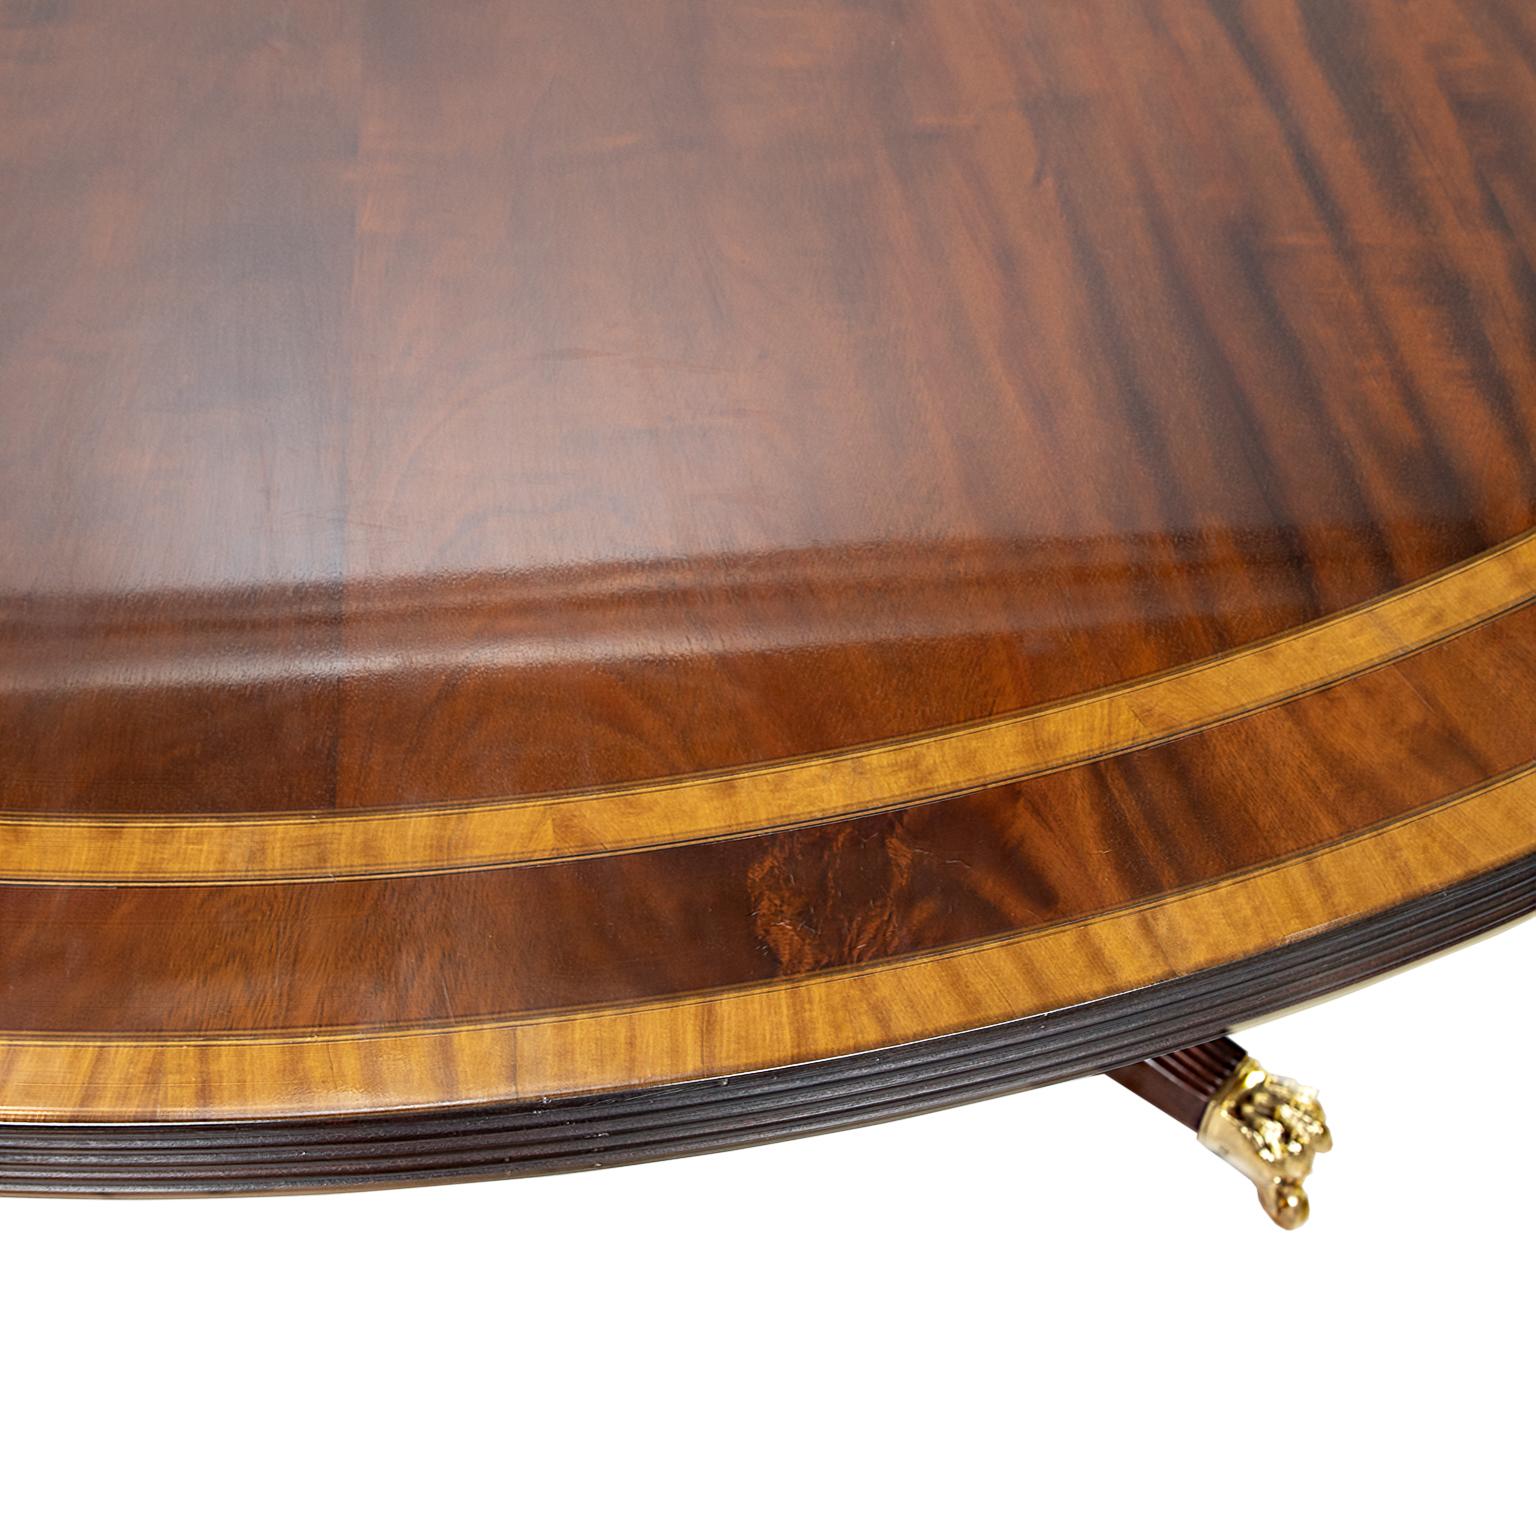 This is a solid mahogany triple band dining table in the Sheraton style. Fine figured grain pattern to the top. The banding is satinwood, walnut, satinwood with ebony string inlay dividing each banding. The top rest upon a birdcage base with four